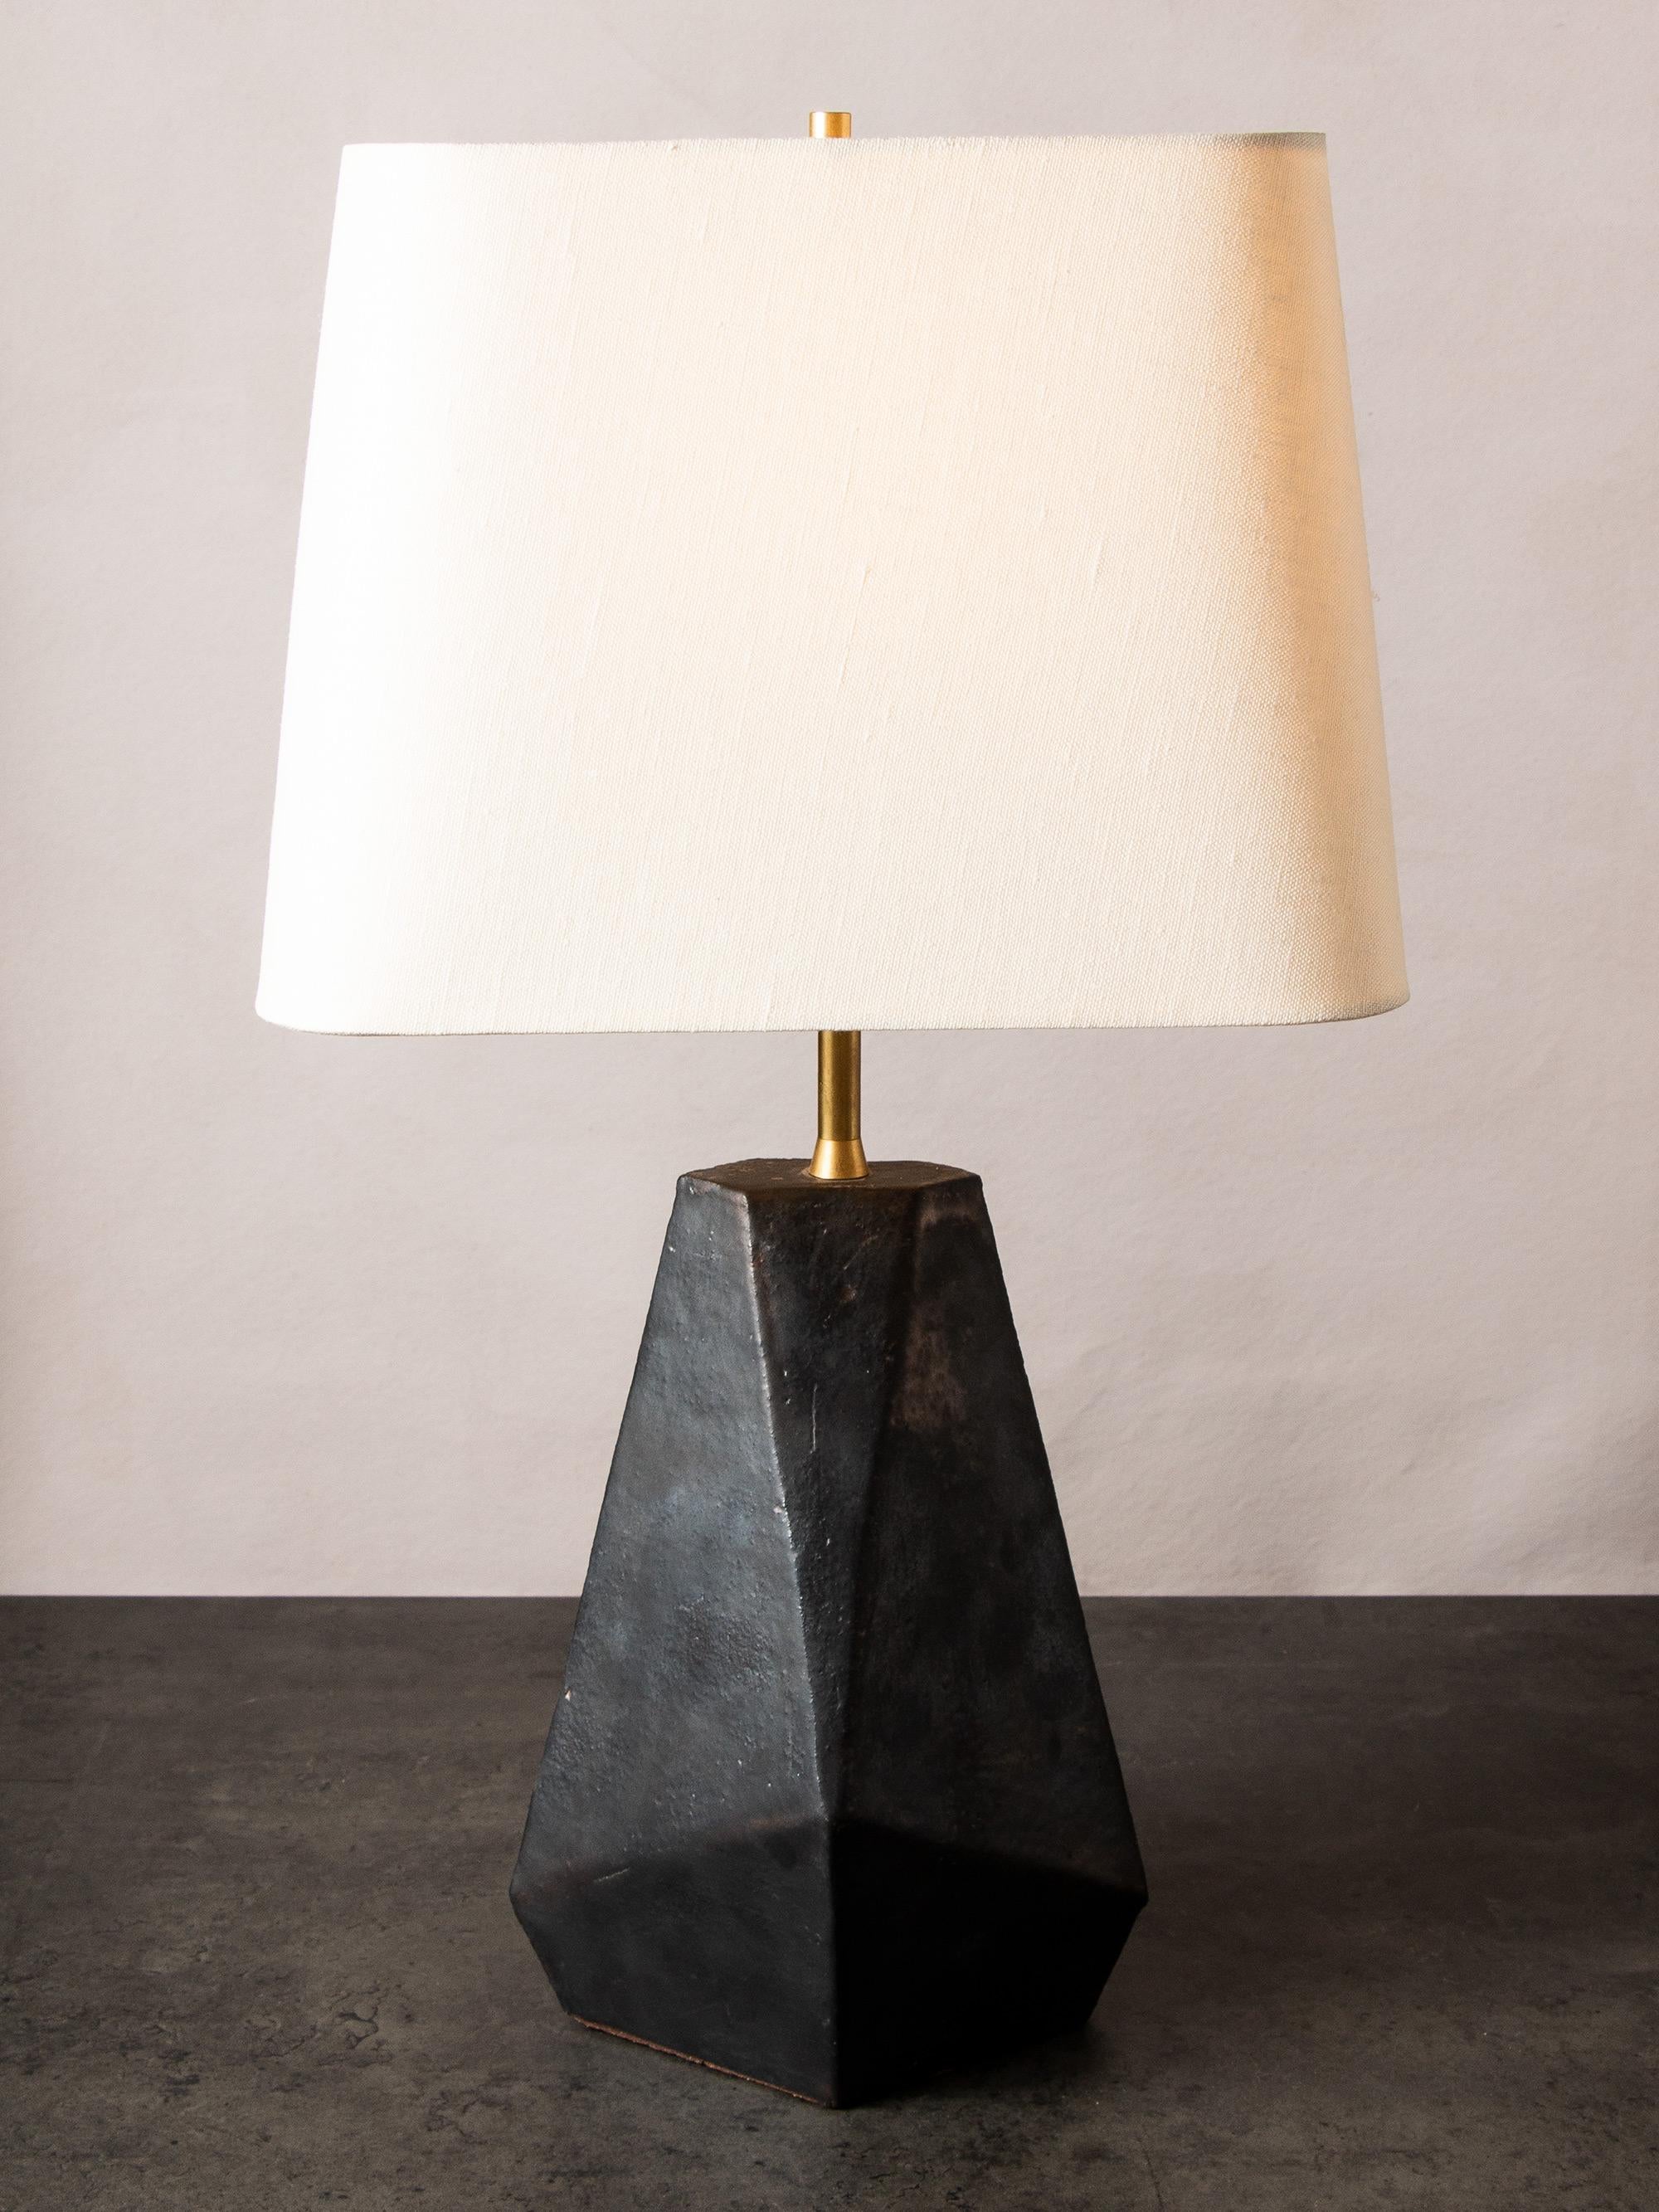 Inspired by midcentury Brutalist architecture, this tapered ceramic table lamp base combines clean geometric lines with the warmth and individuality inherent in handmade work. Each piece is assembled individually from flat sheets of clay, into a